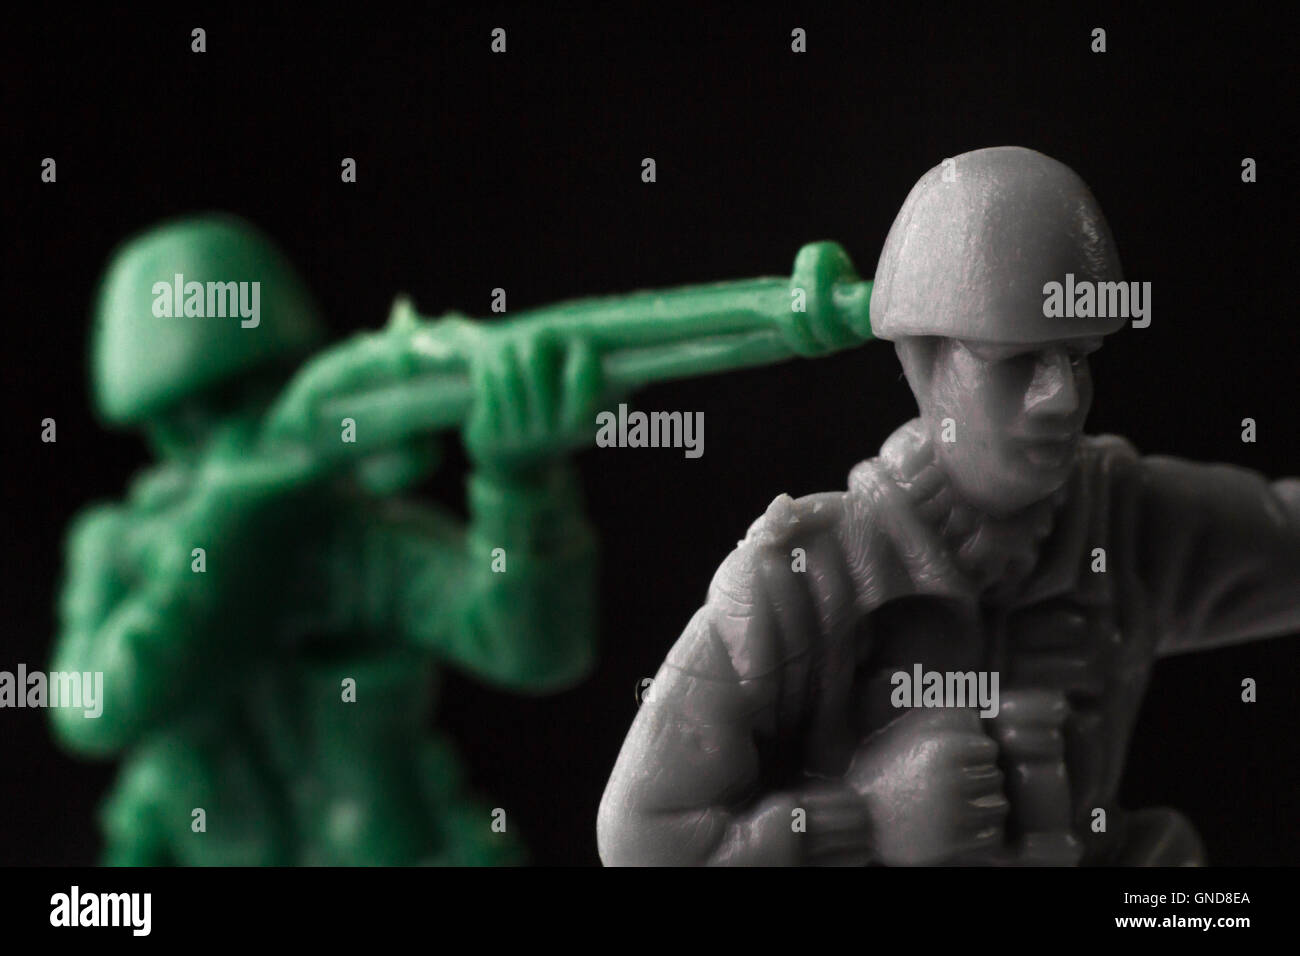 Green toy soldier surprises enemy from behind Stock Photo